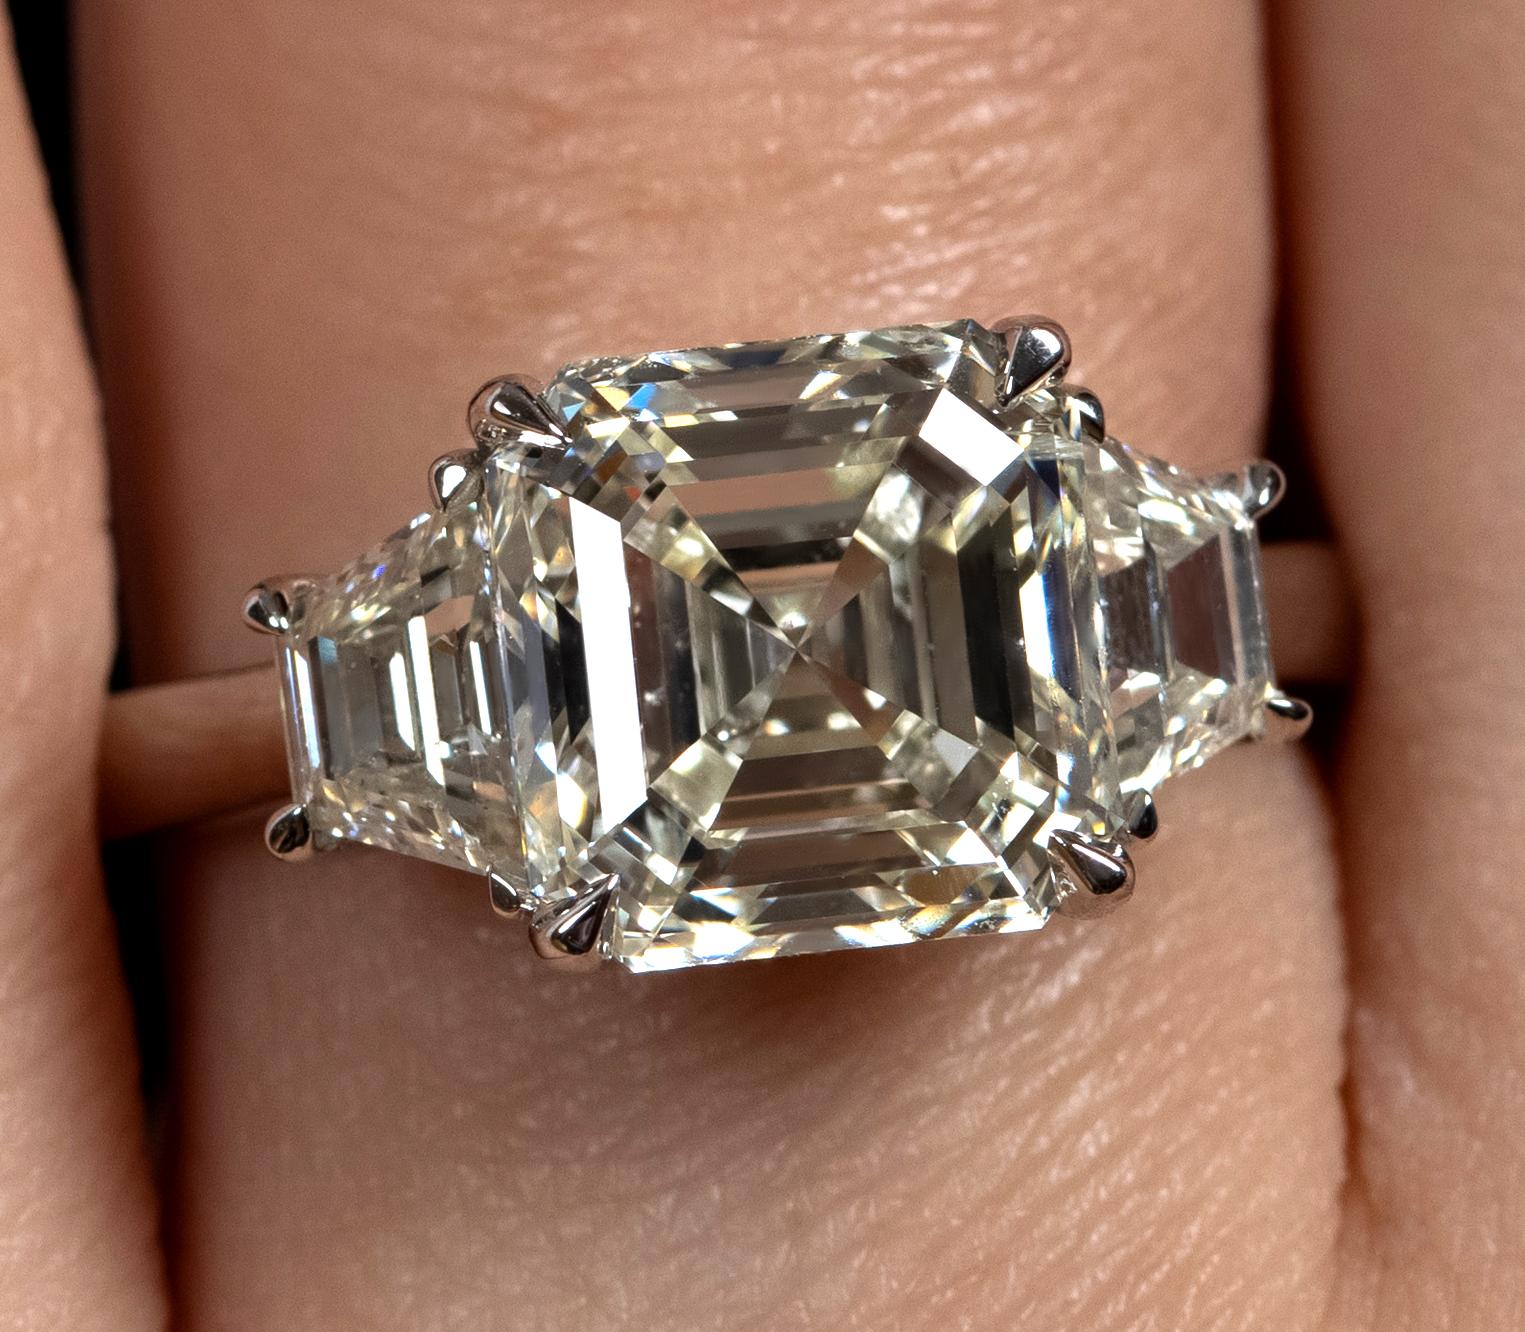 A Breathtaking Estate Handmade Platinum (stamped) Asscher Diamond Three-Stone Engagement ring. The Prong Set Asscher Diamond is 4.03CT with measurements of 8.77x8.60x5.82mm; GIA Certified as M color and SI2 clarity (Appears Warm White and Eye